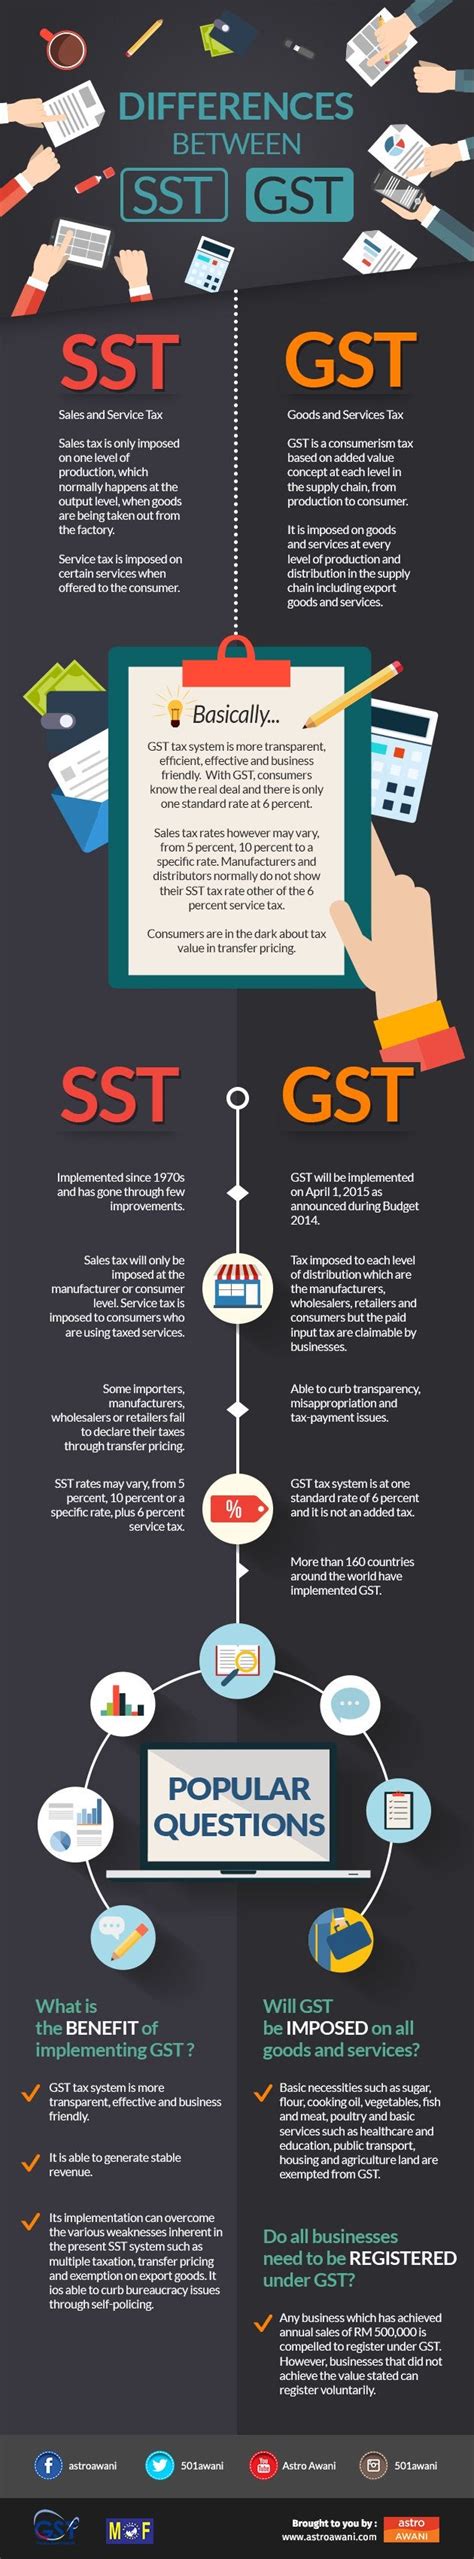 The advantages for sst are: The differences between GST and SST : malaysia